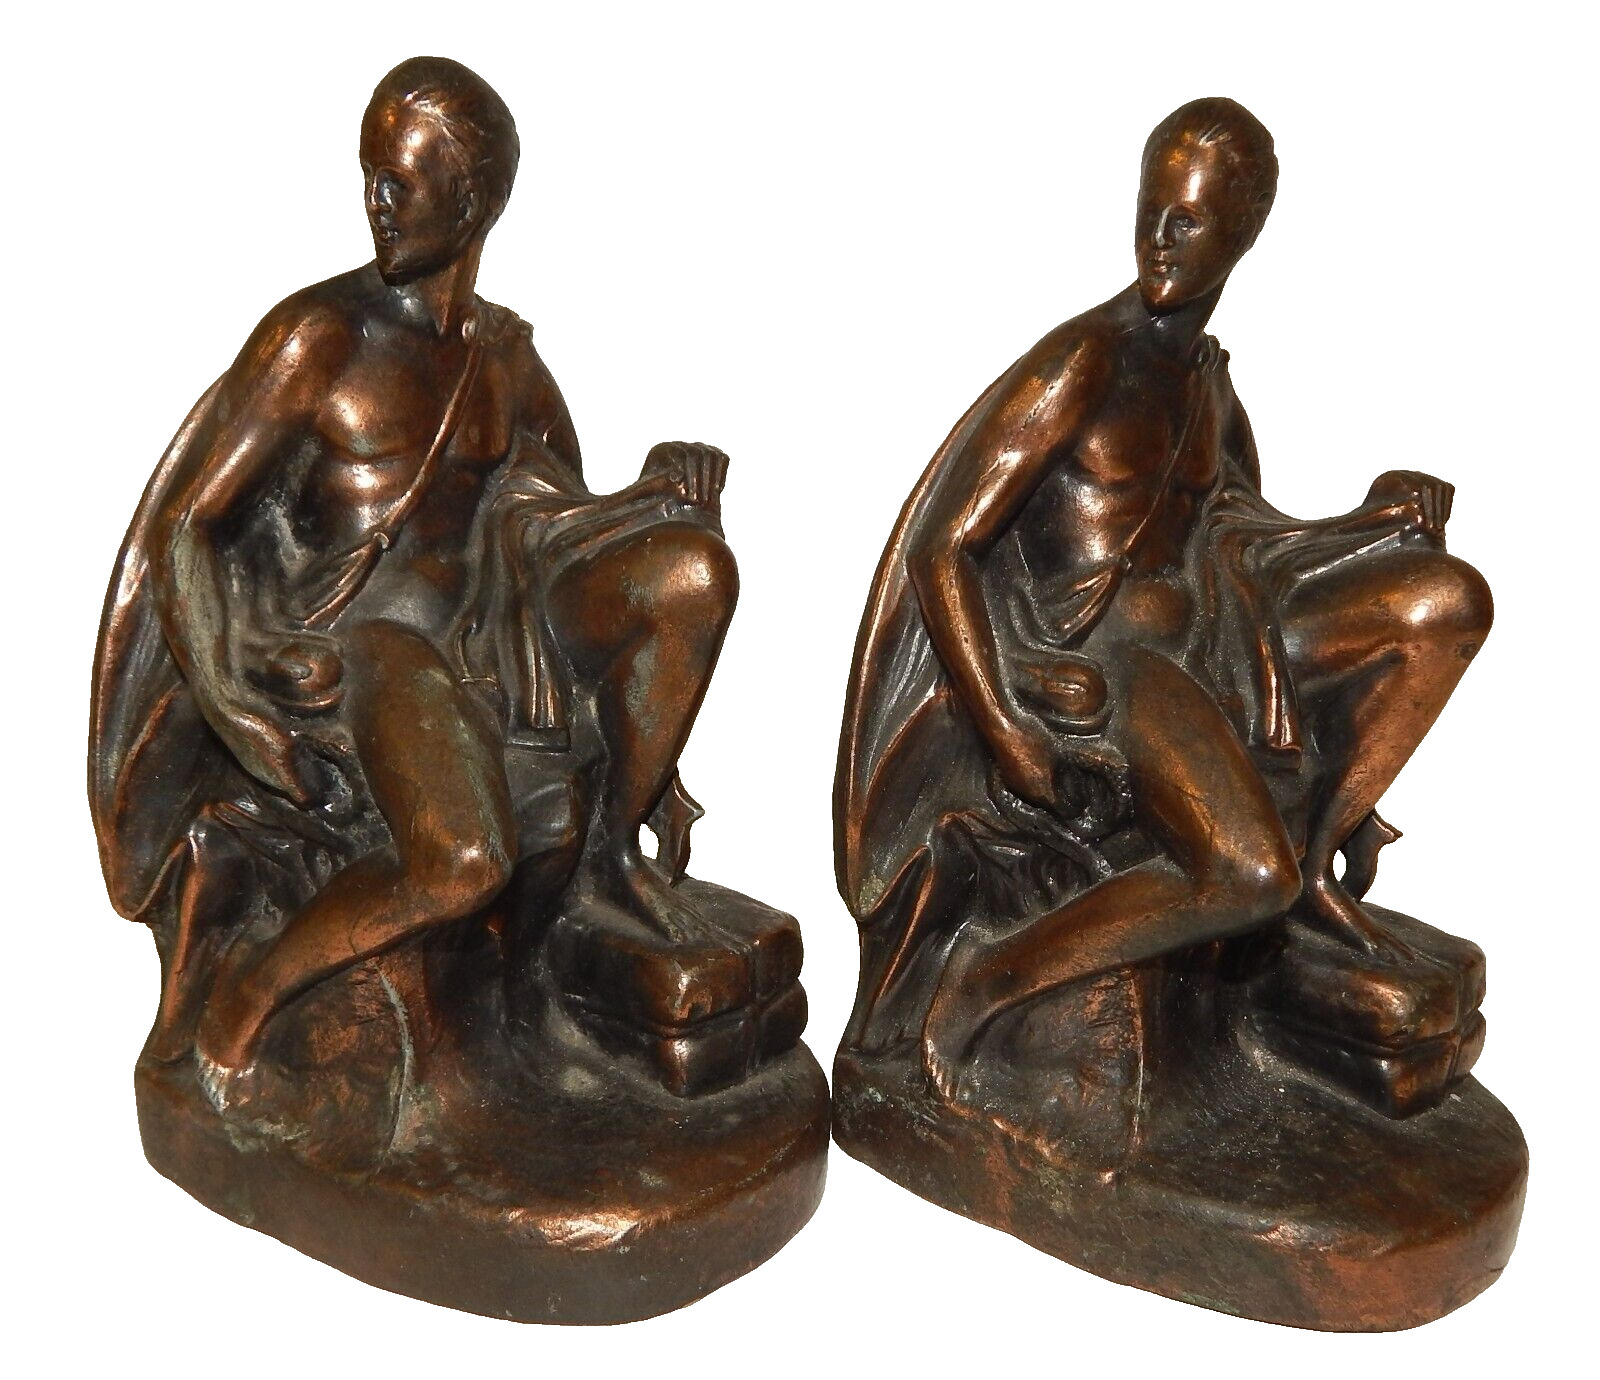 Vintage Copper Bookends - Neptune God of the Seas